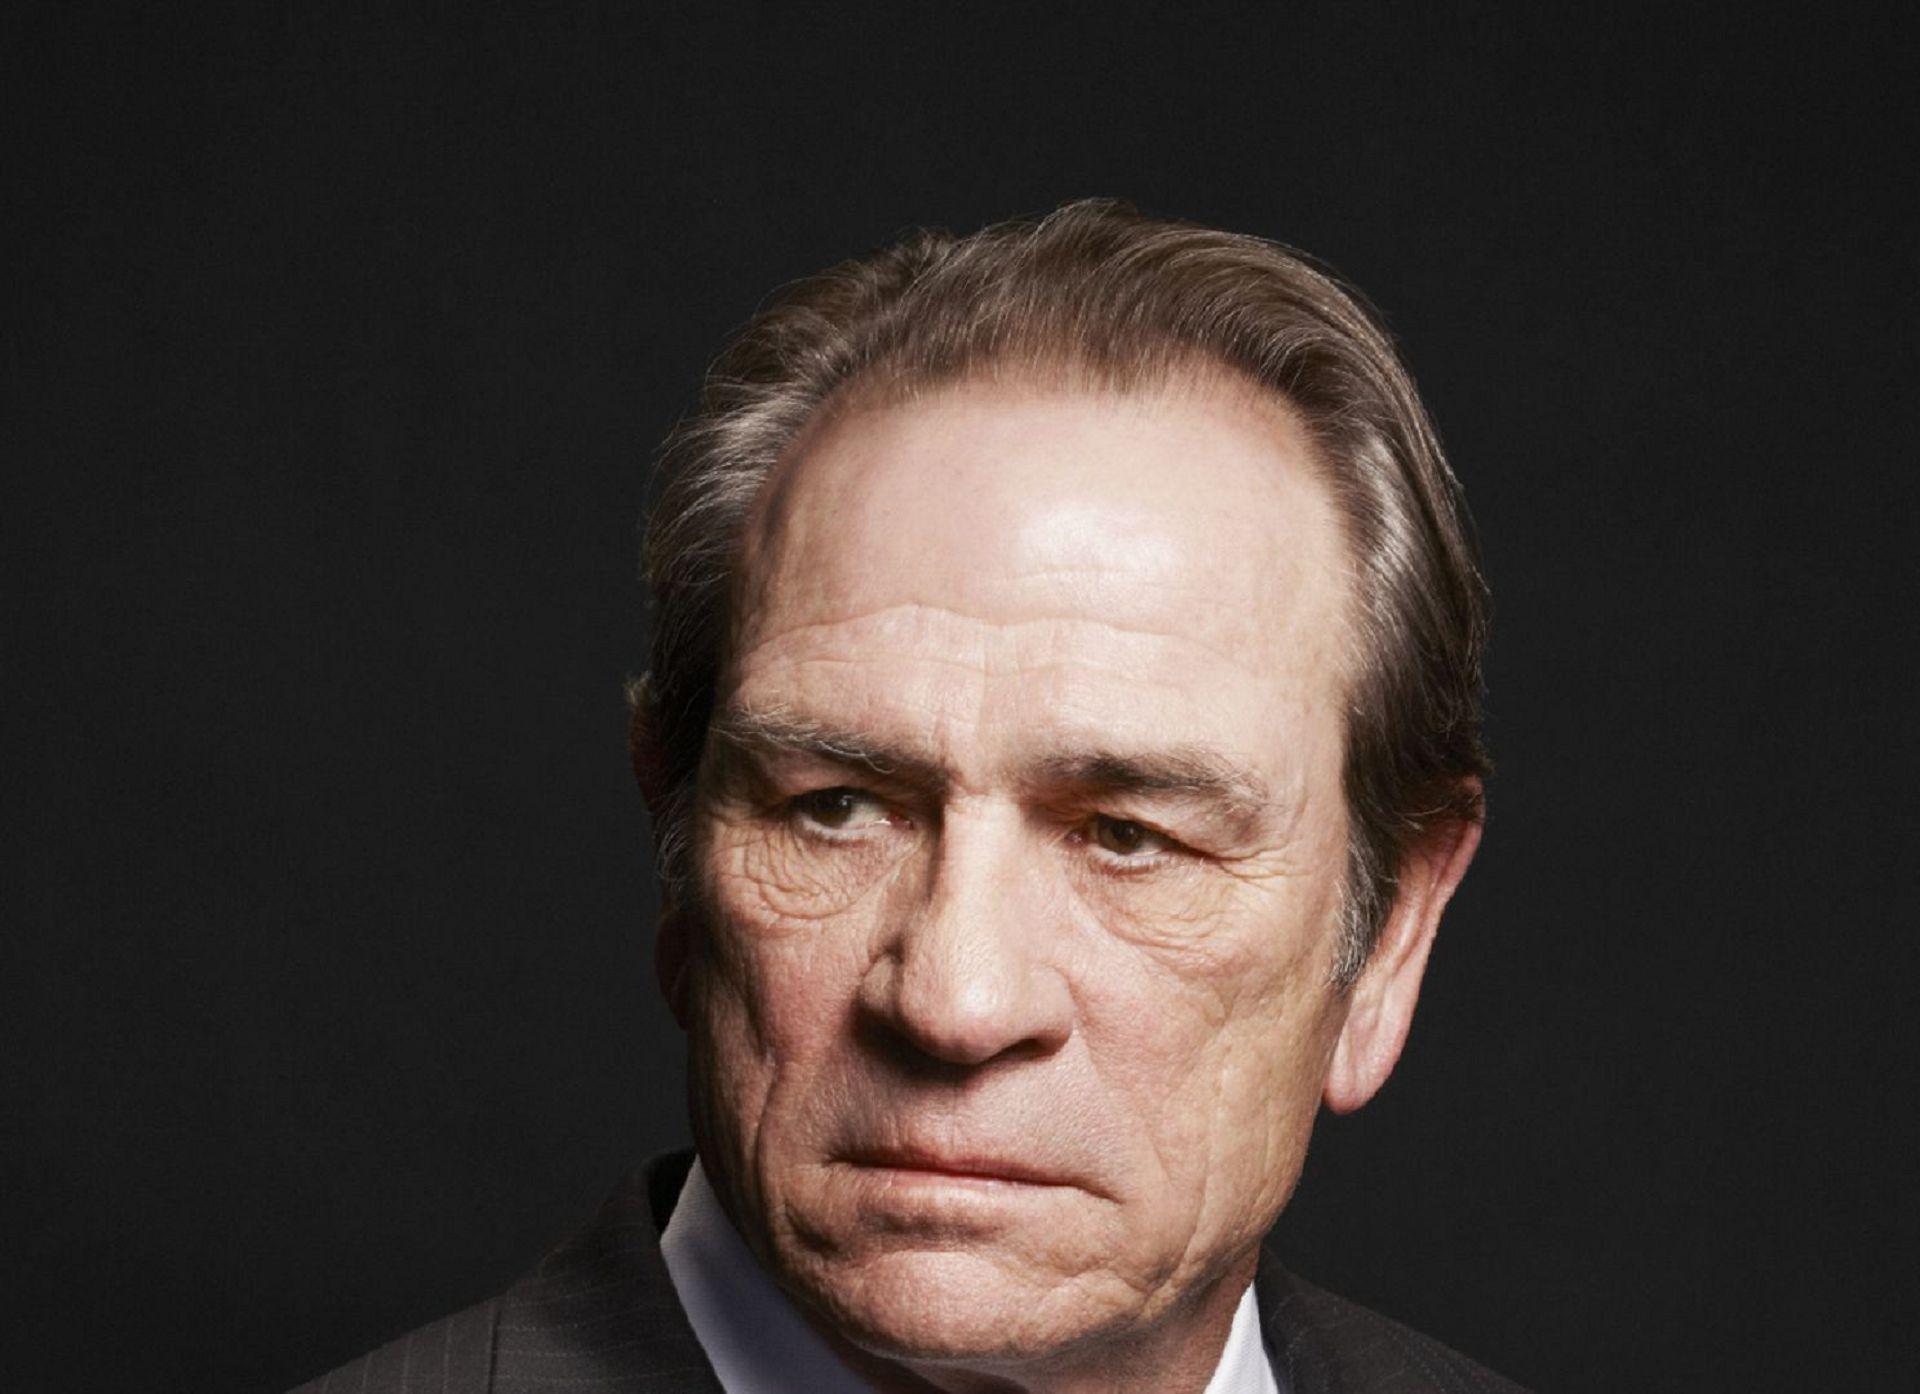 Tommy Lee Jones Wallpaper Background. Celebs and movies. Tommy